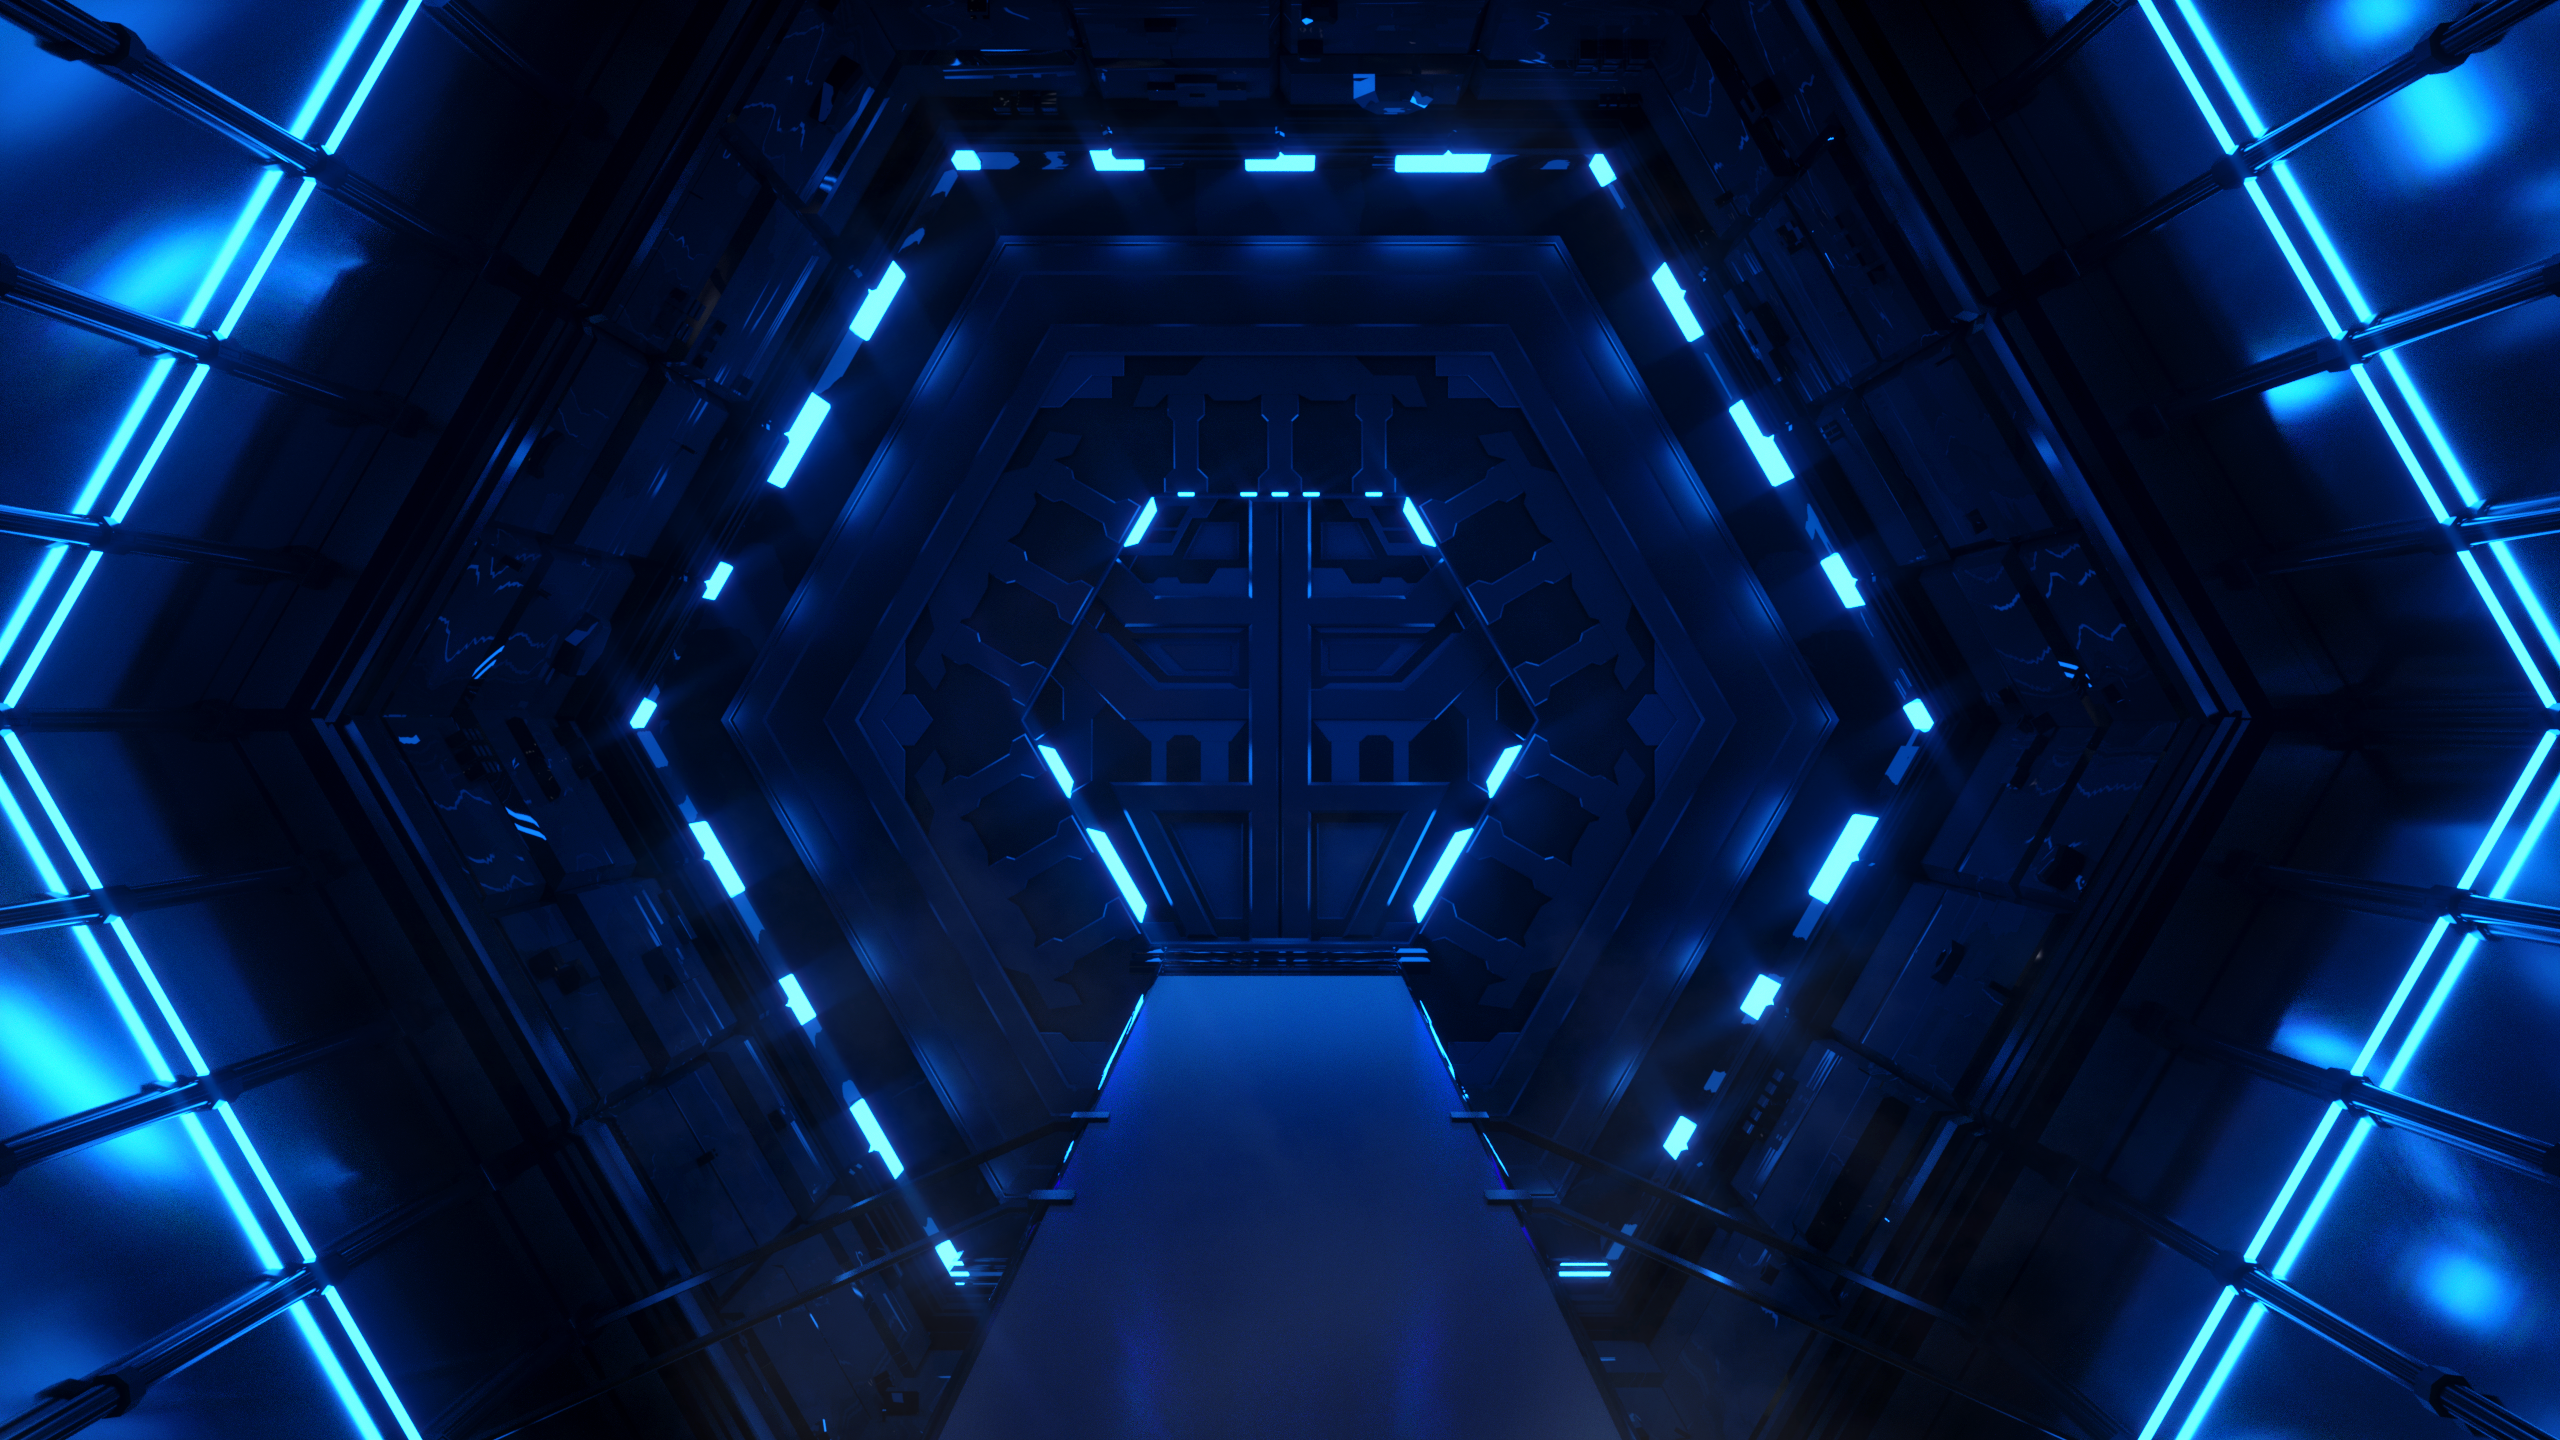 Space Tunnel Shining Neon 3D Abstract Glowing Octagons Polygon Art Spaceship 2560x1440